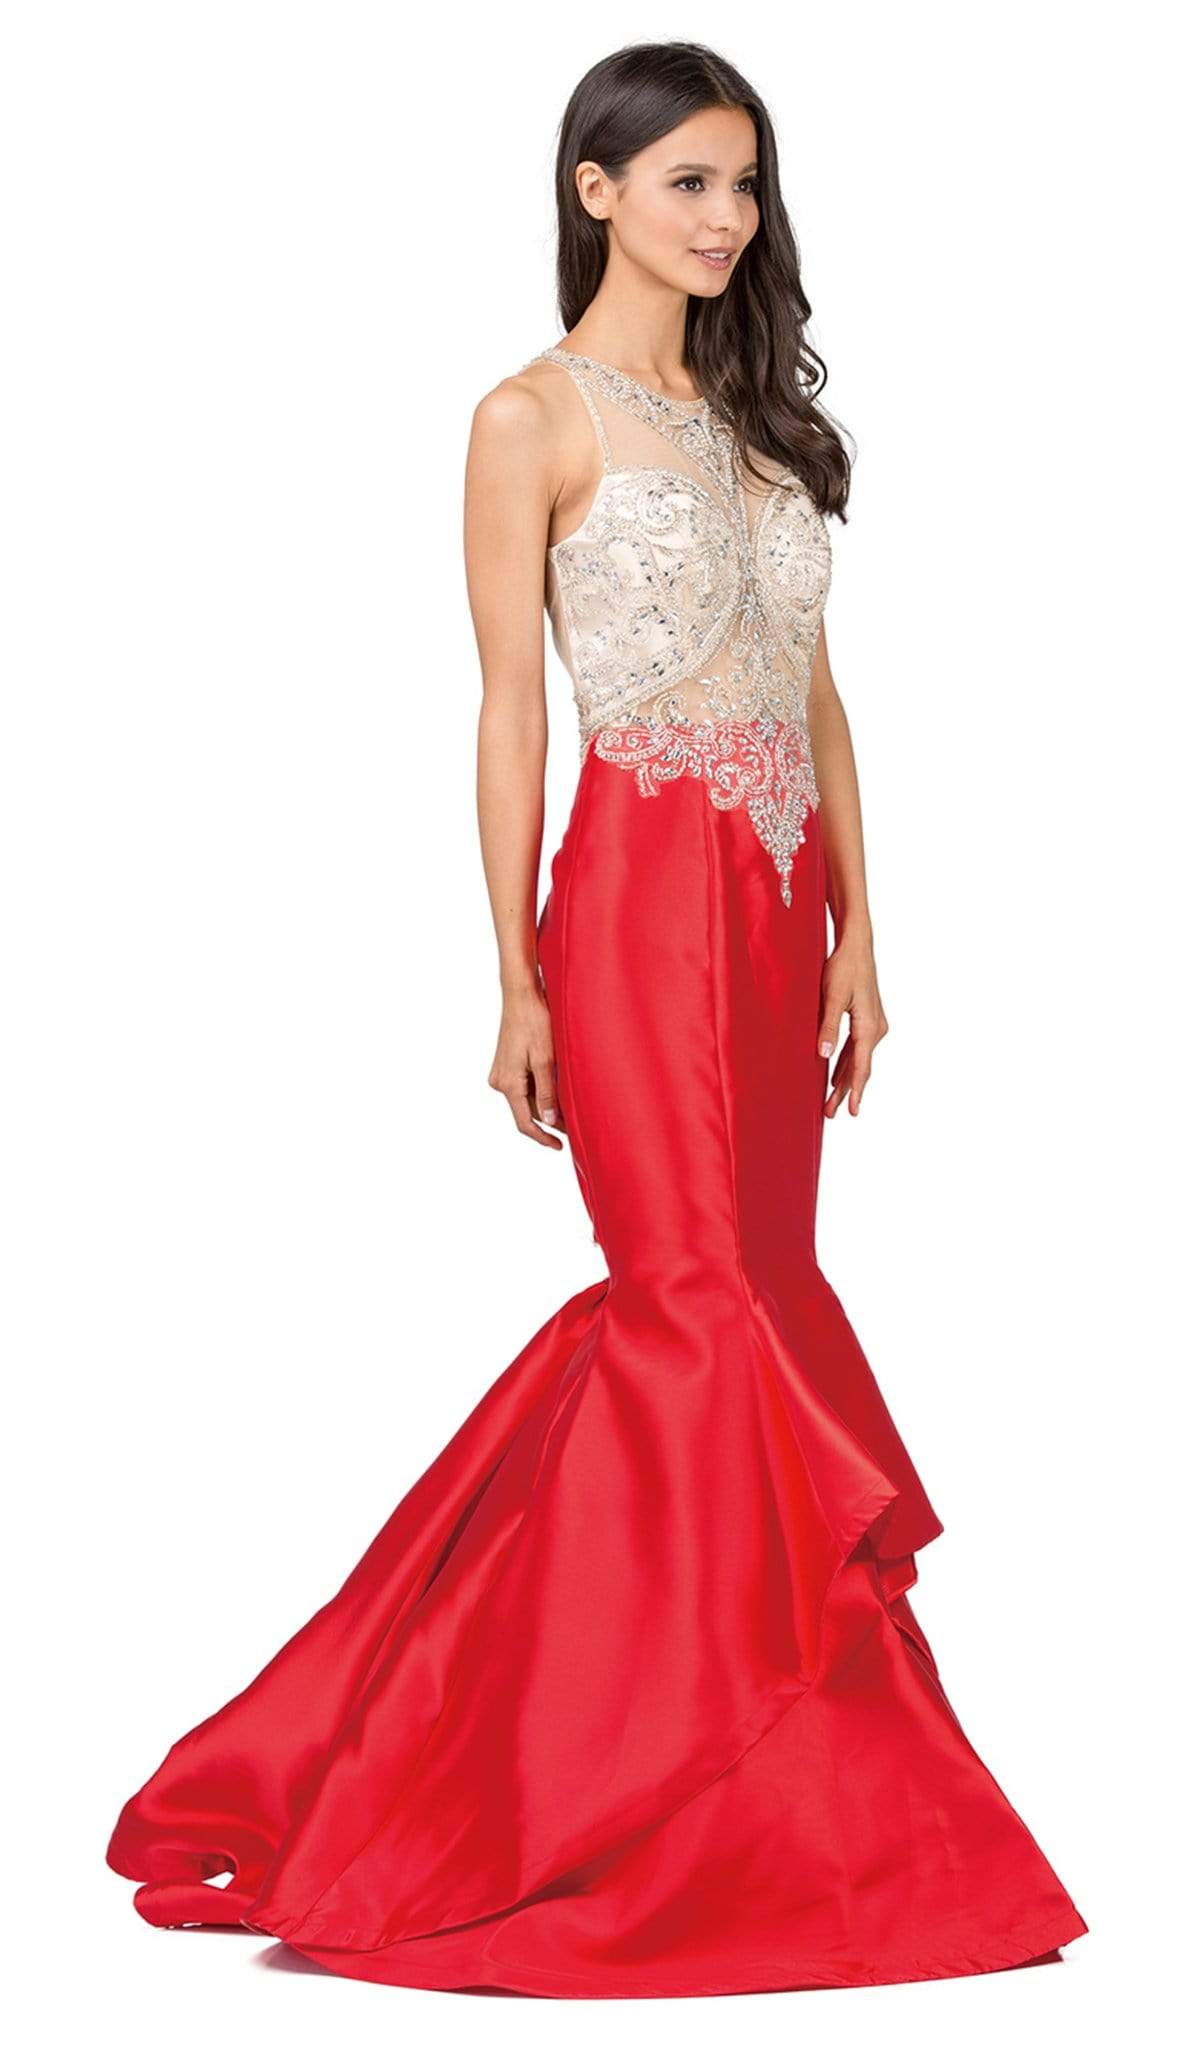 Dancing Queen - 9930 Jeweled Illusion Bodice Flounced Mermaid Gown
